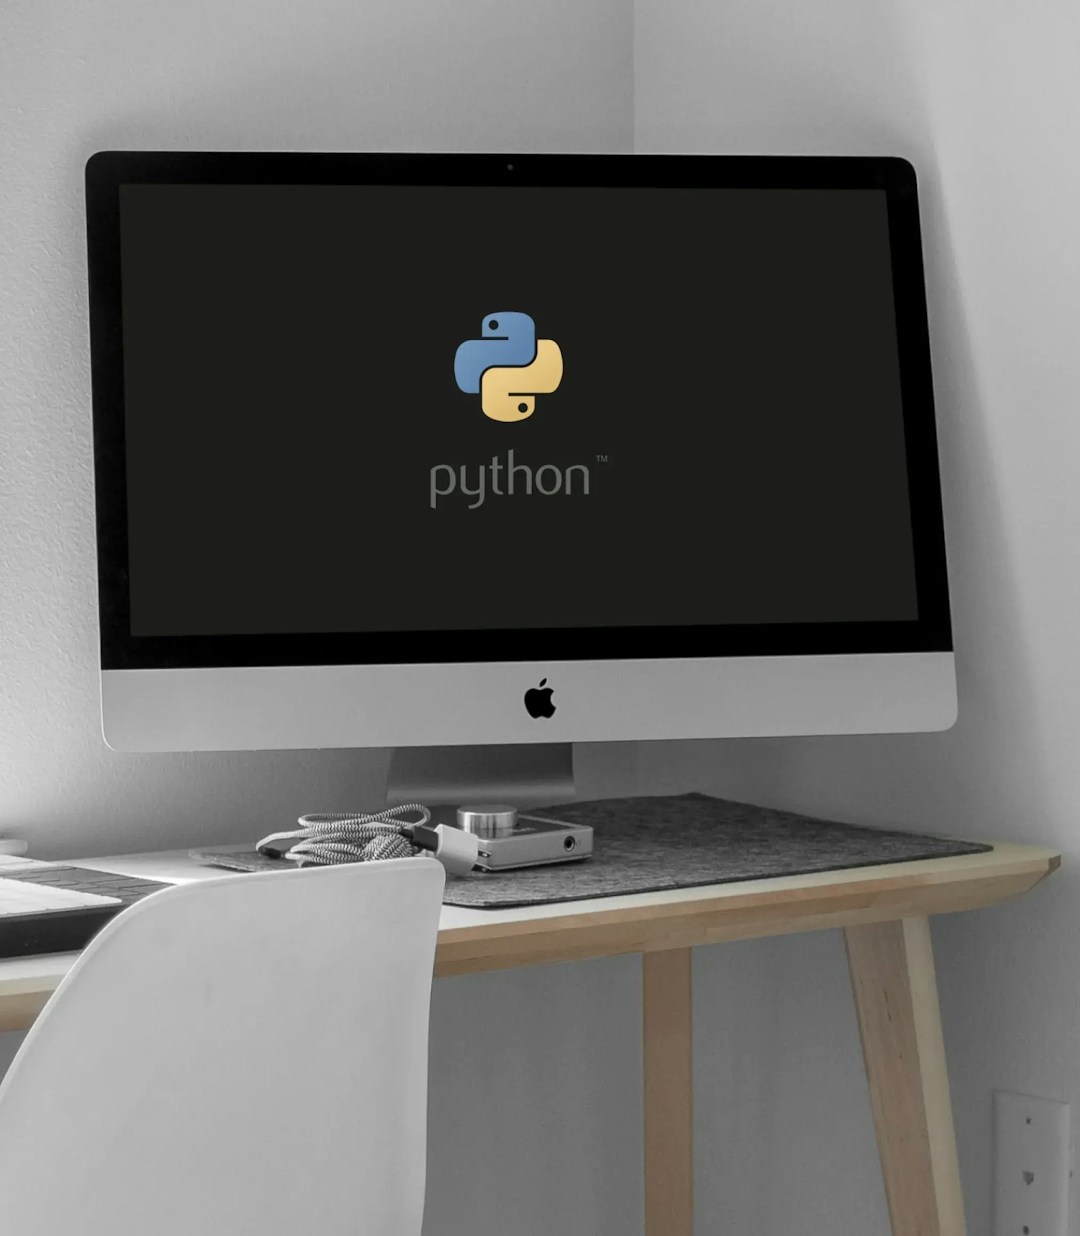 Hype about Python